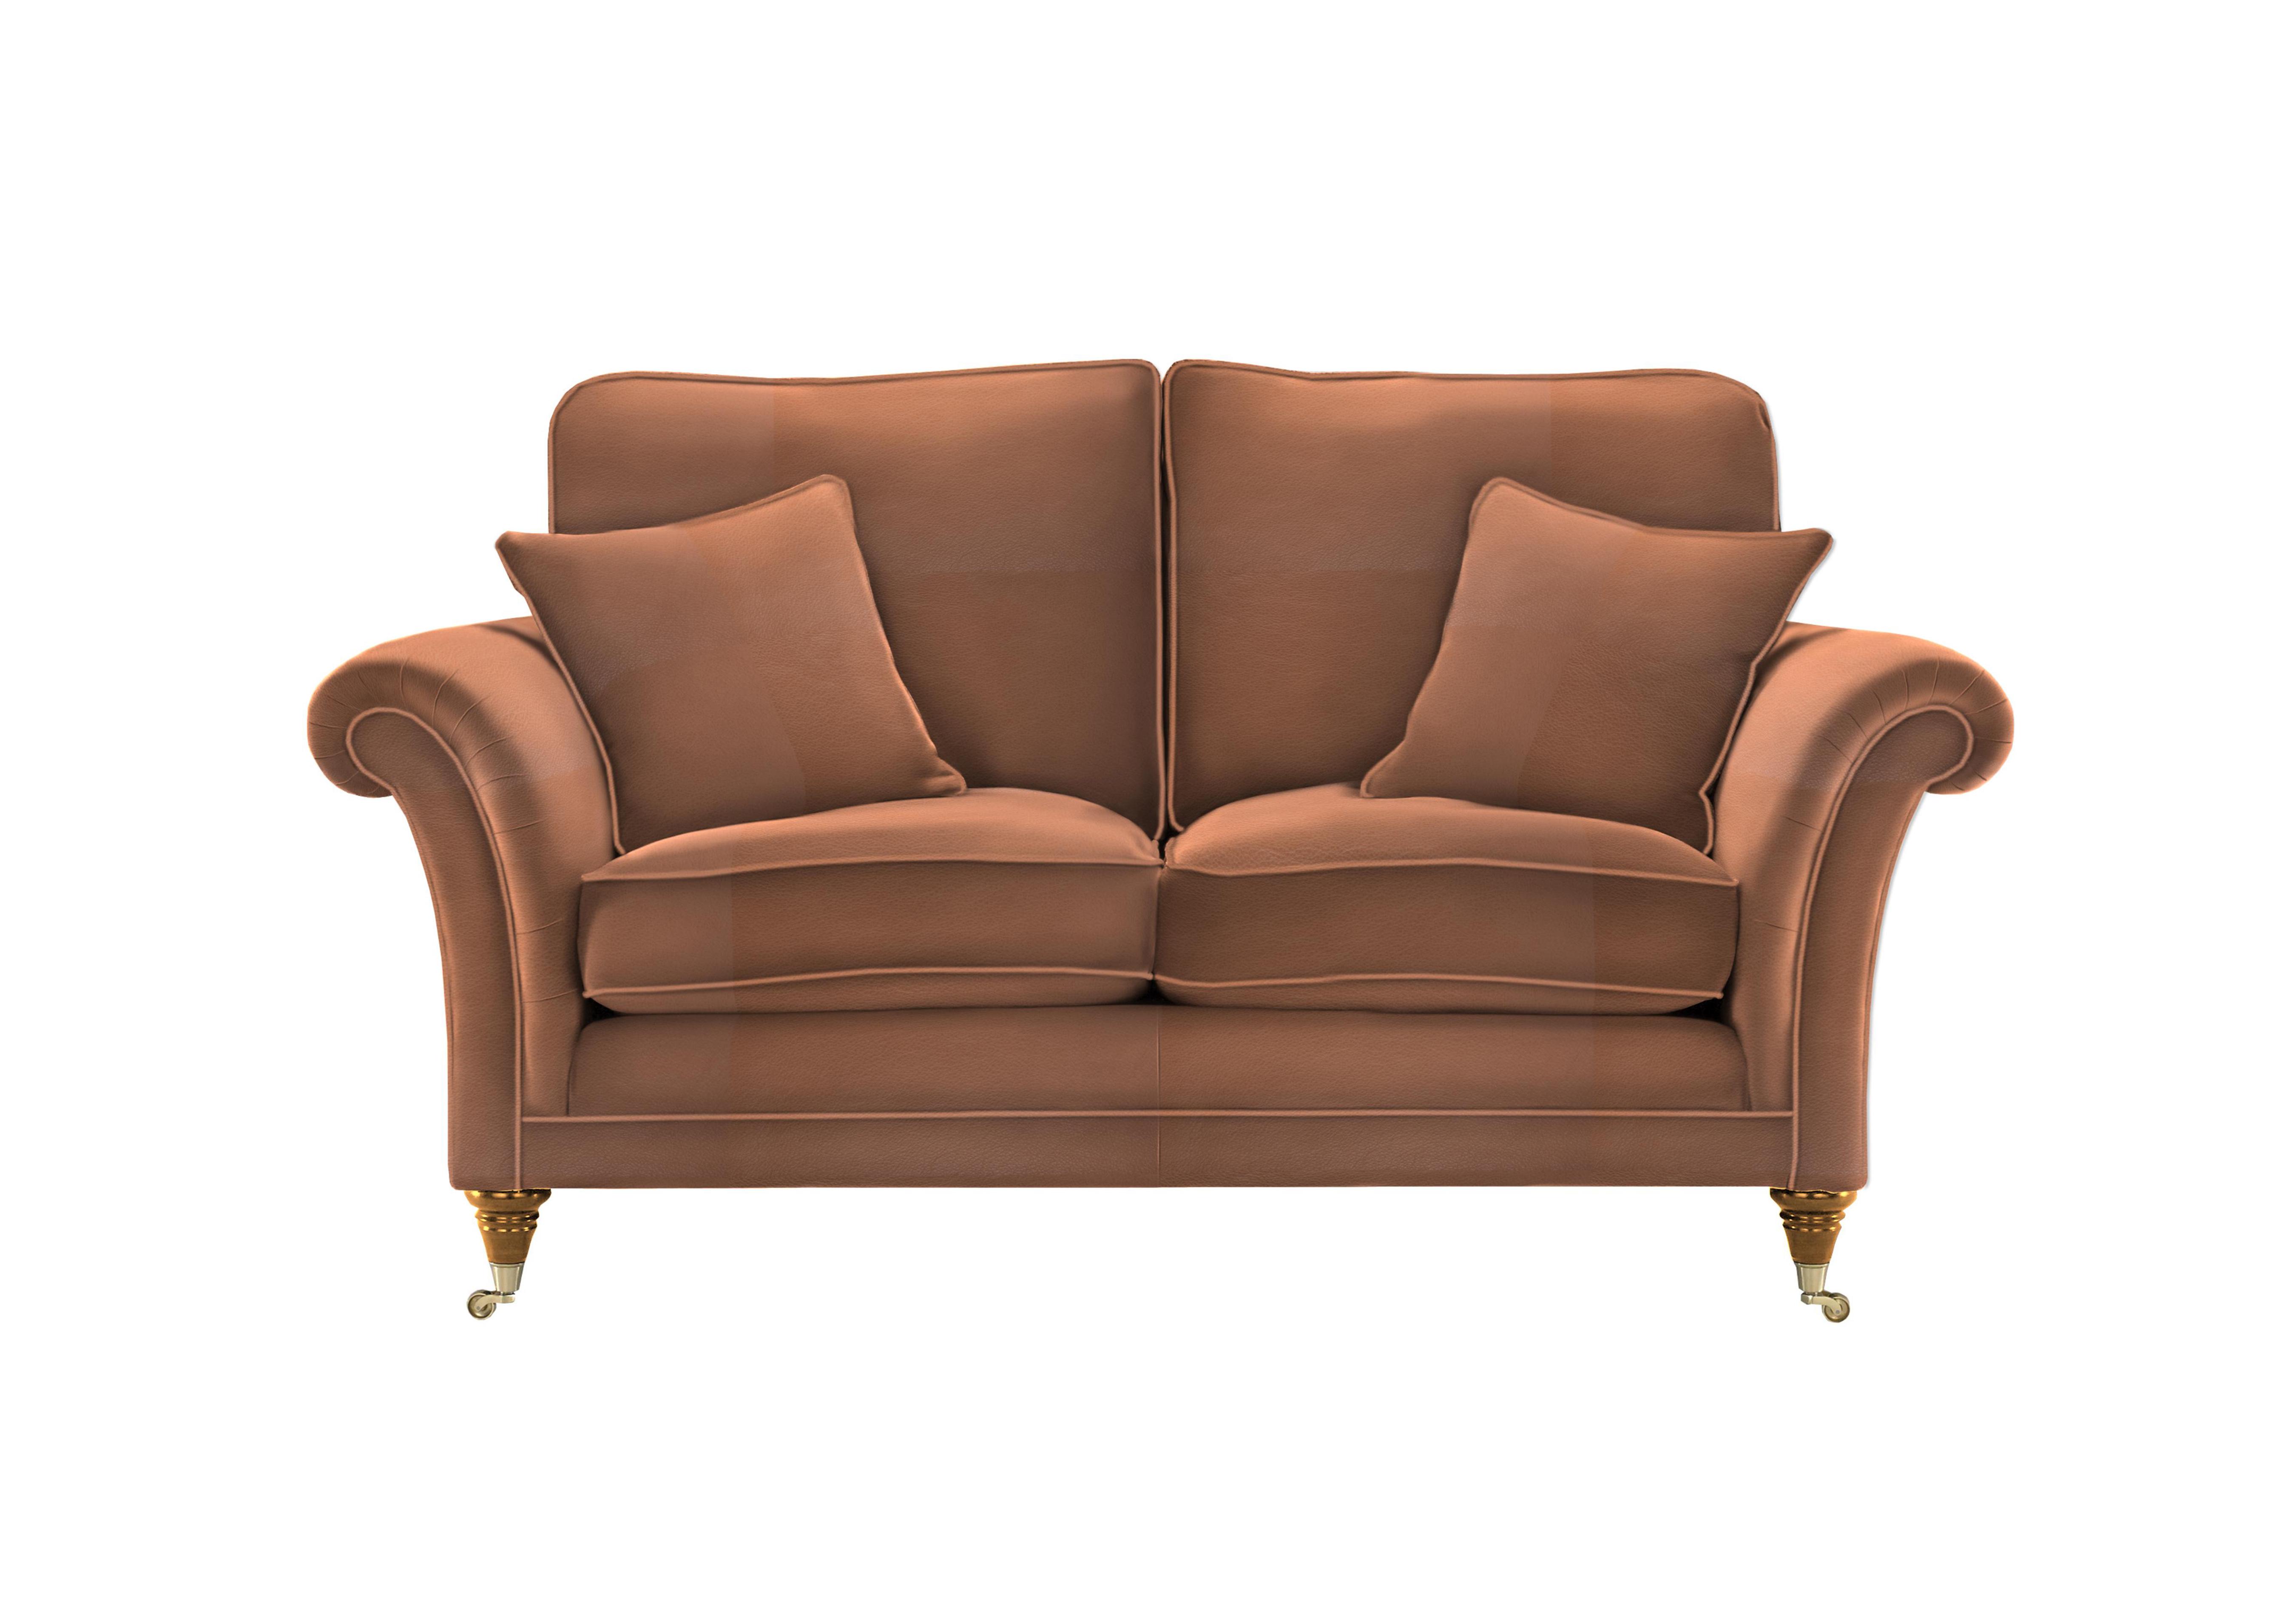 Burghley 2 Seater Leather Sofa in 009019-0025 Roma Nutmeg on Furniture Village